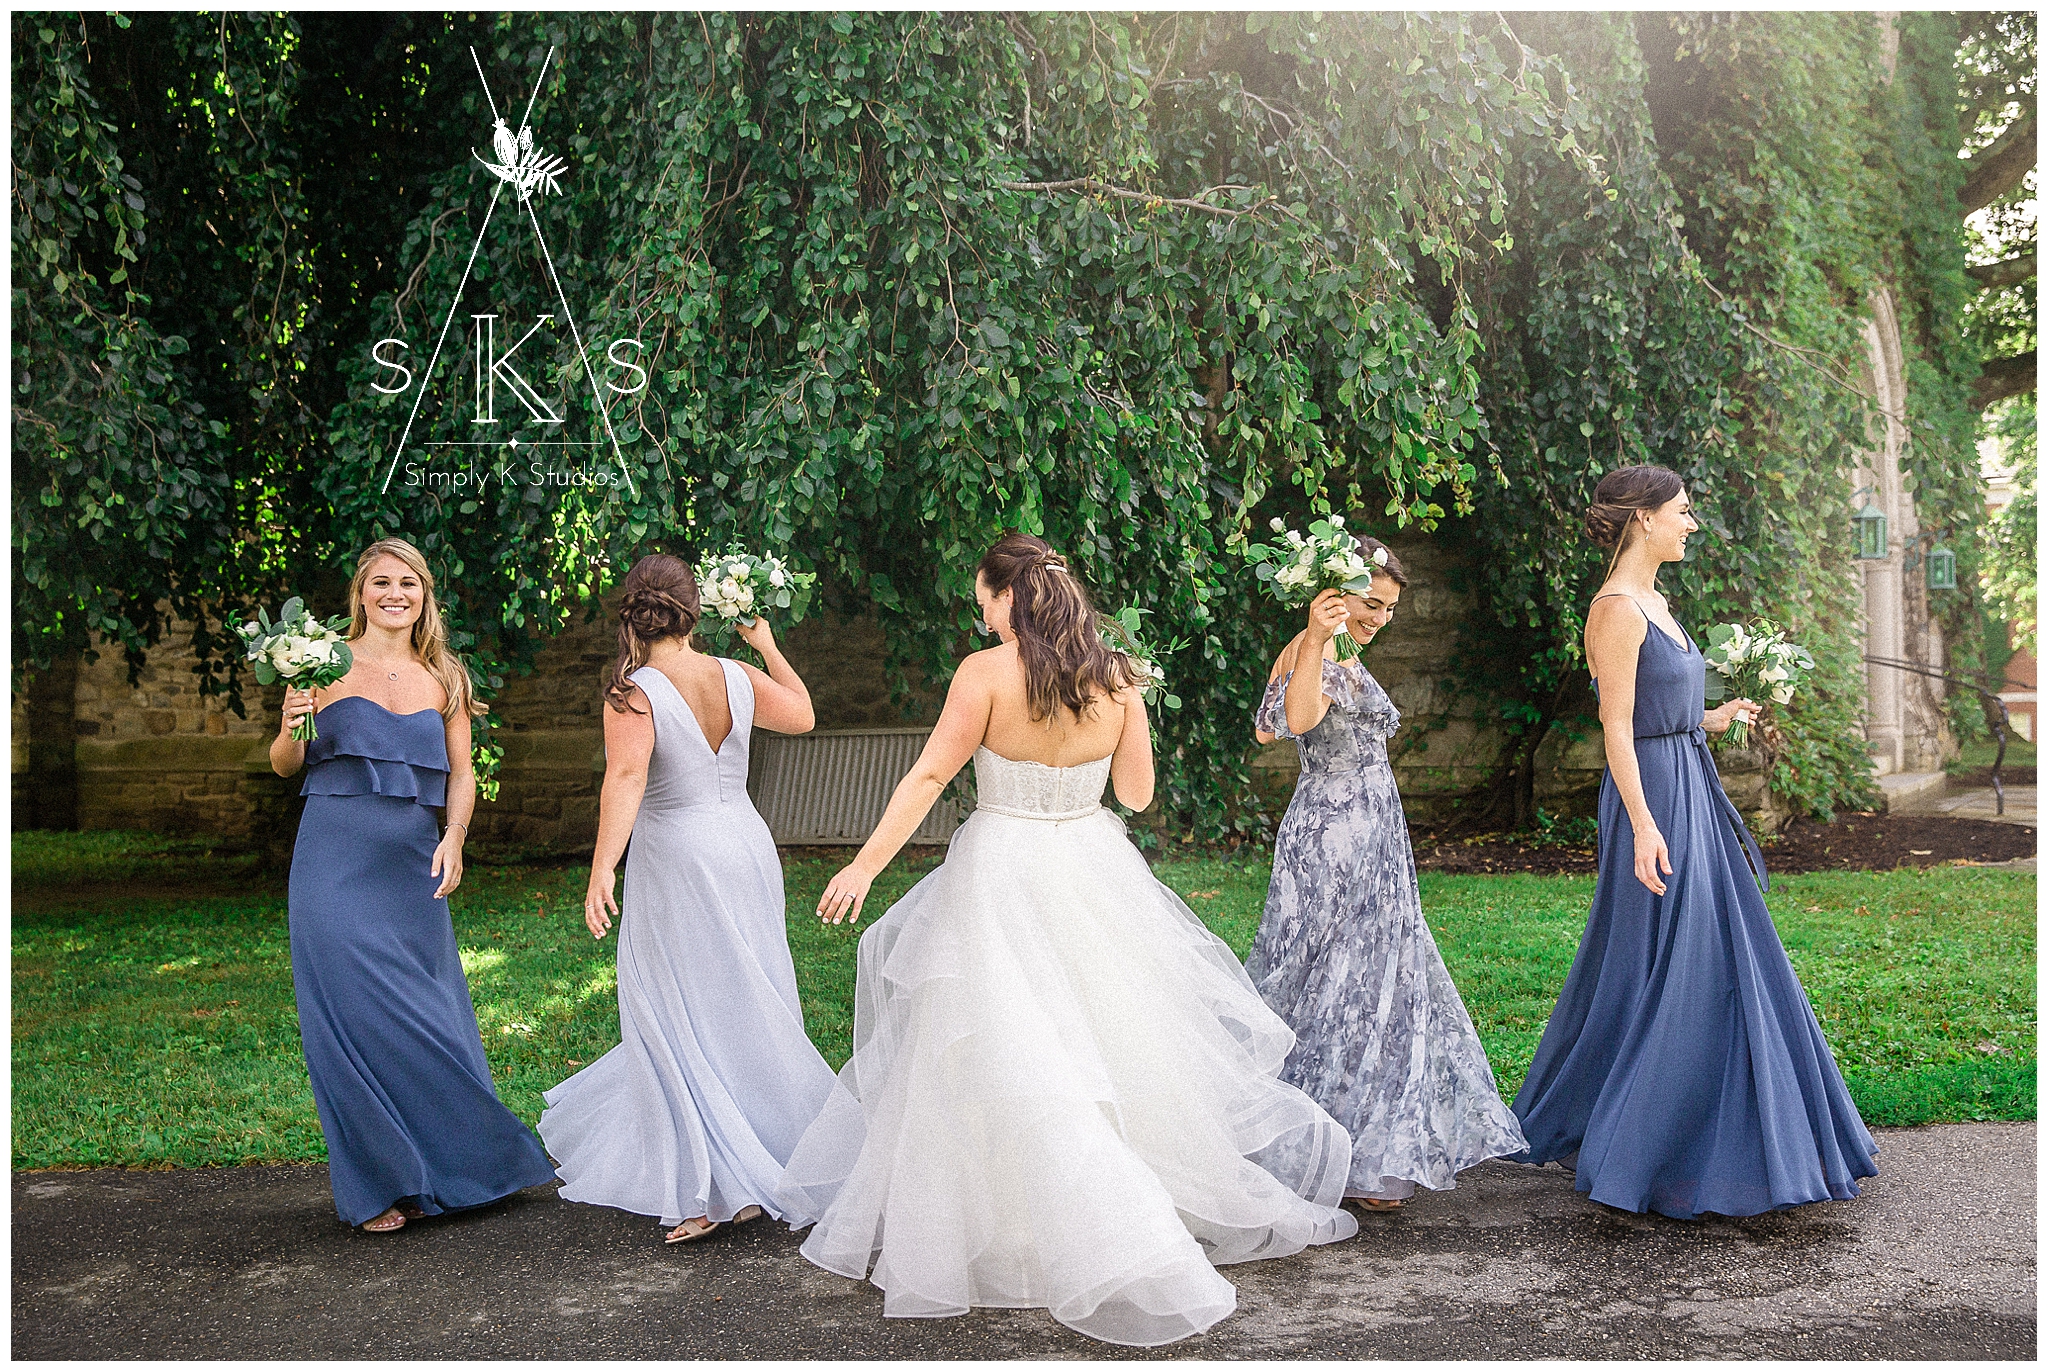  Bridesmaids twirling in their dresses 